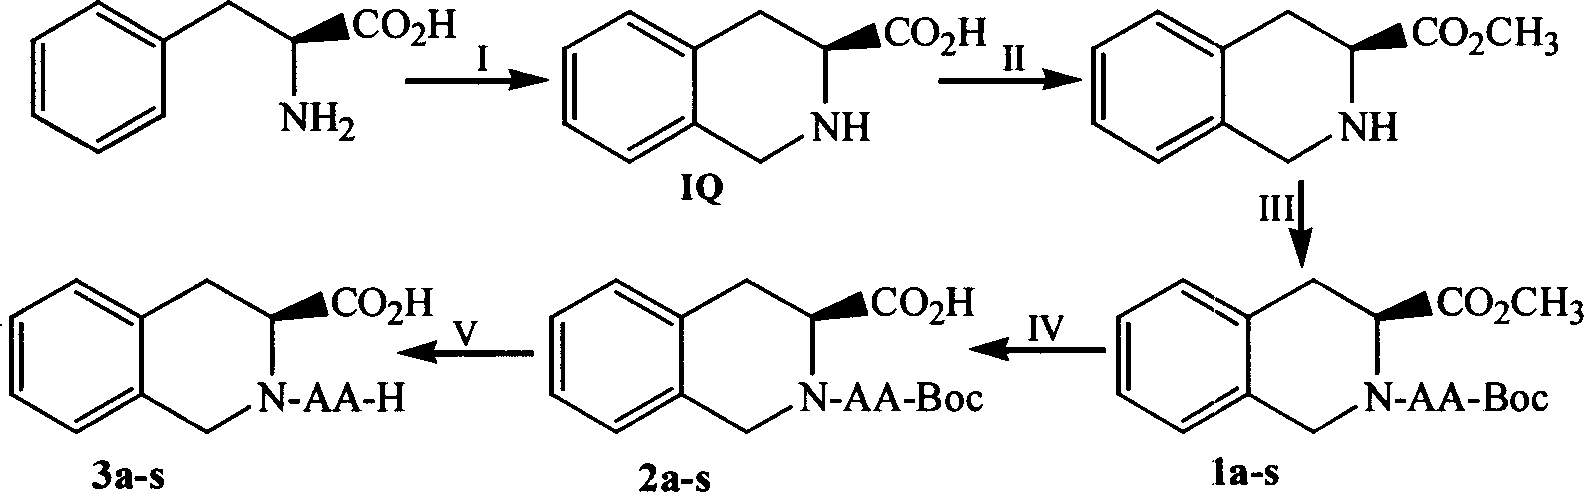 (3S)-N-(L-aminoacyl)-1,2,3,4-tetrahydroisoquinoline-3-carboxylic acid, preparation method and uses thereof